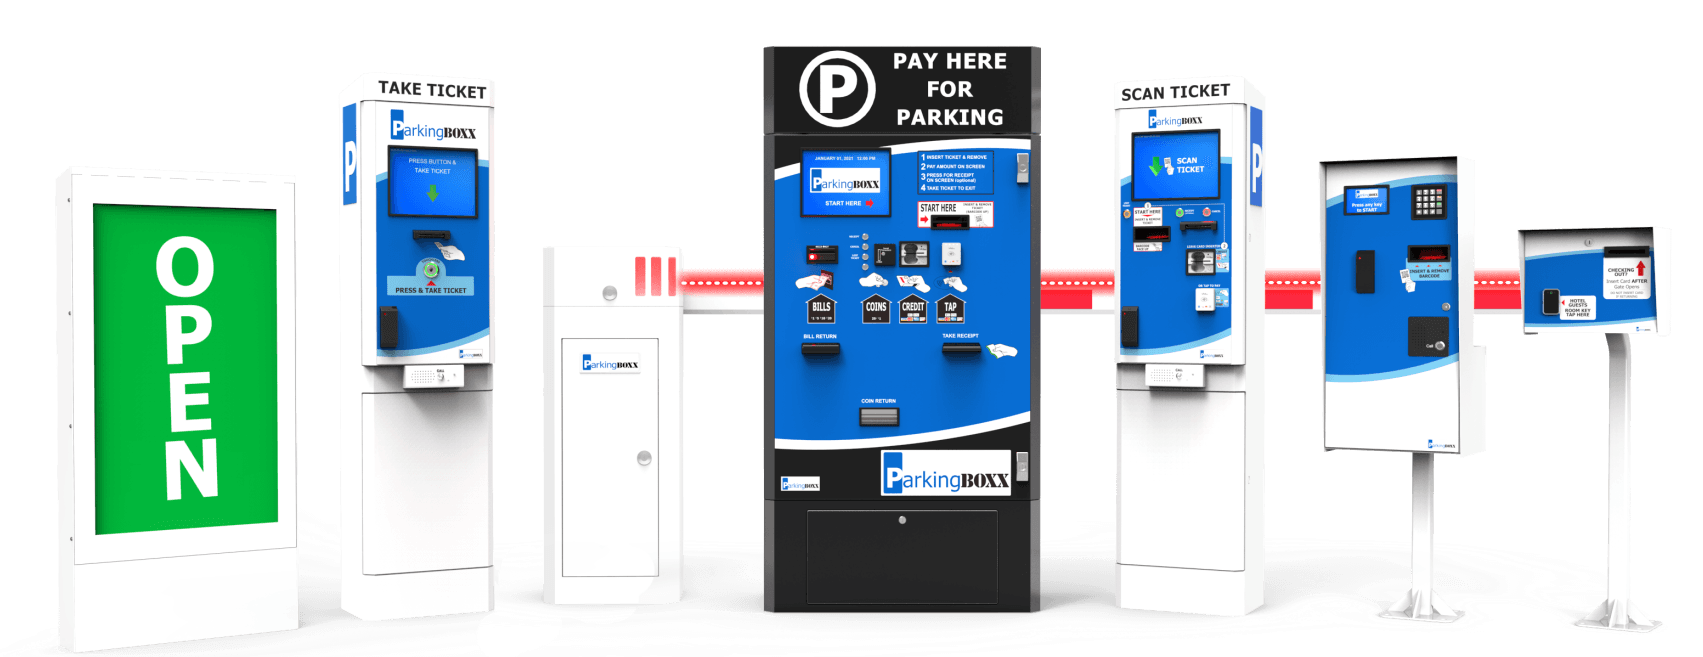 Plan Your Trip to Boston  Parking, Costs & Locations